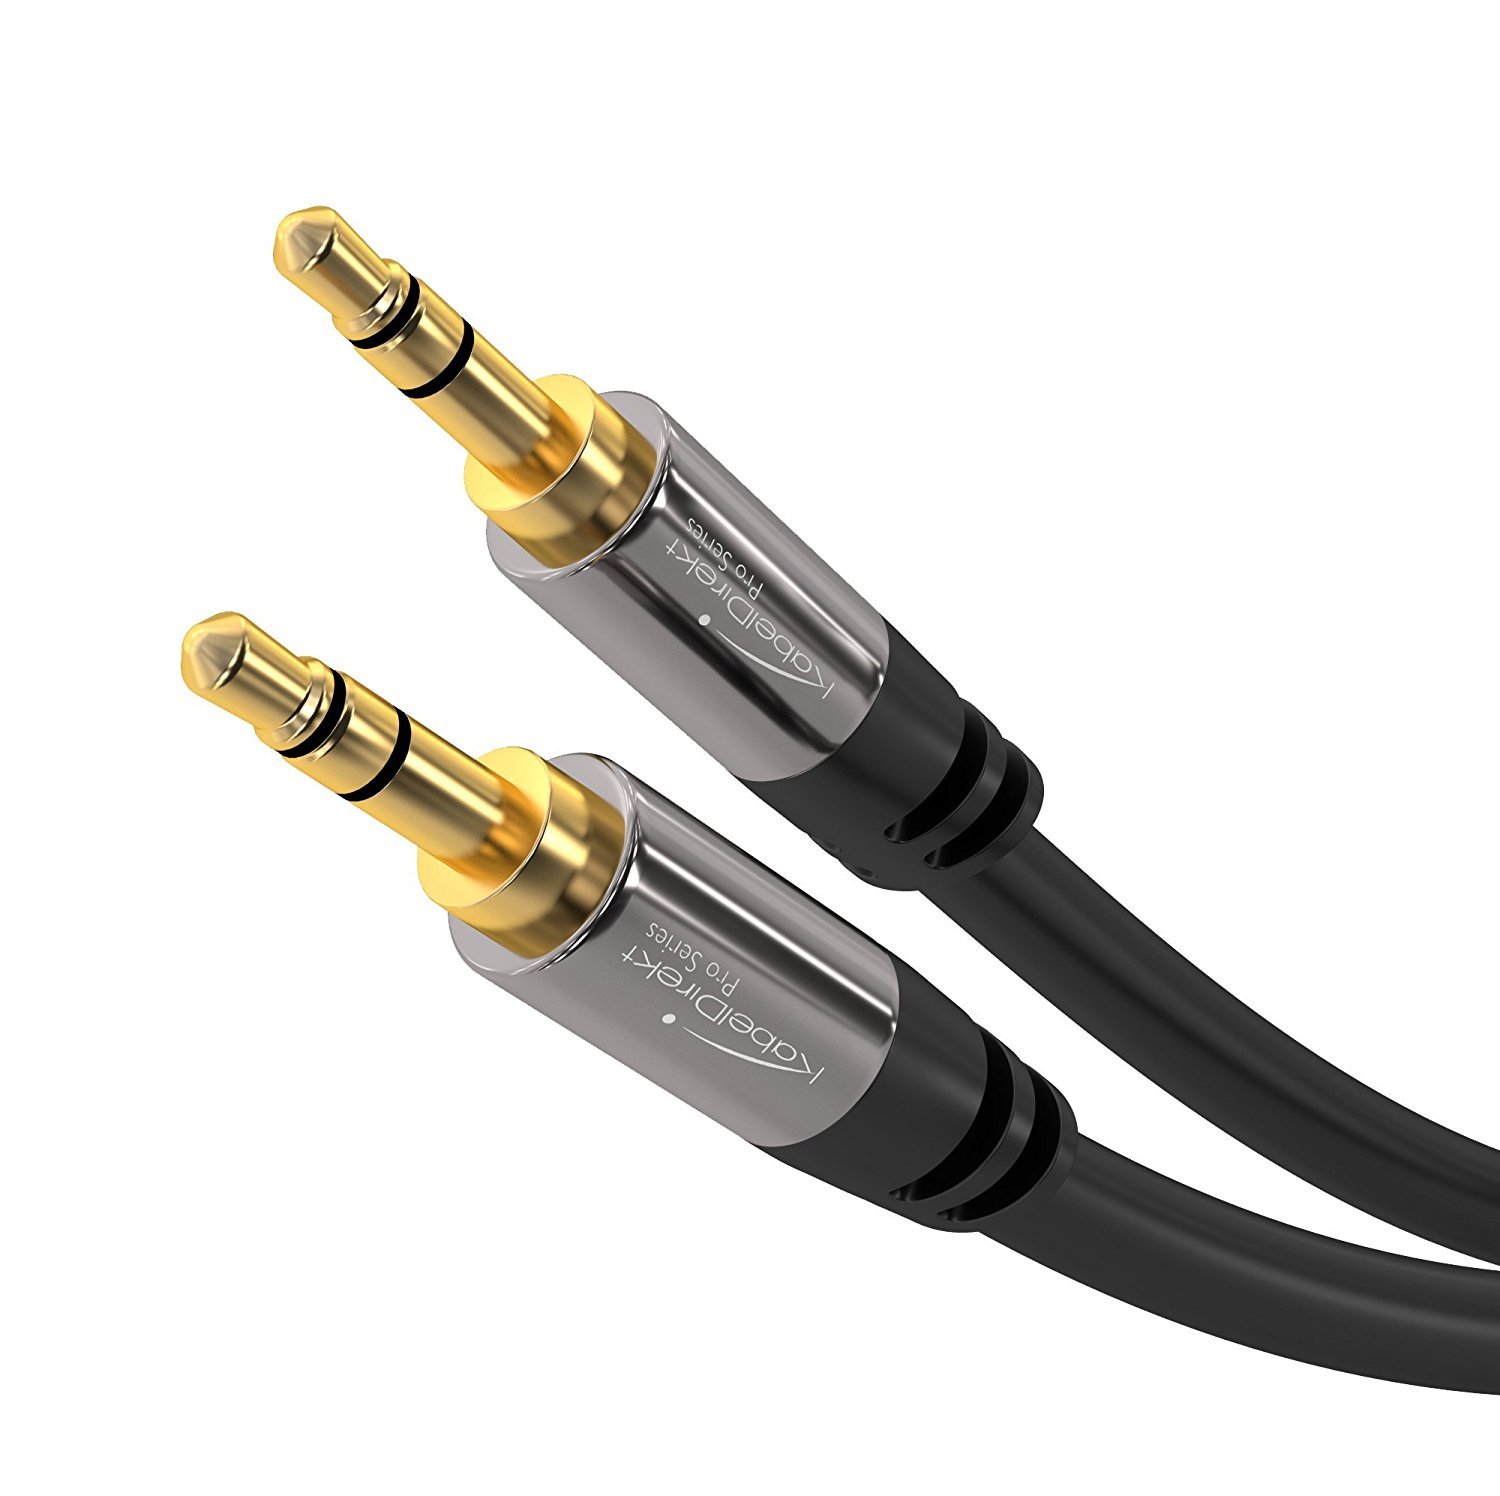 KabelDirekt 3.5mm Unbreakable Stereo Audio AUX Cable, 25-Foot